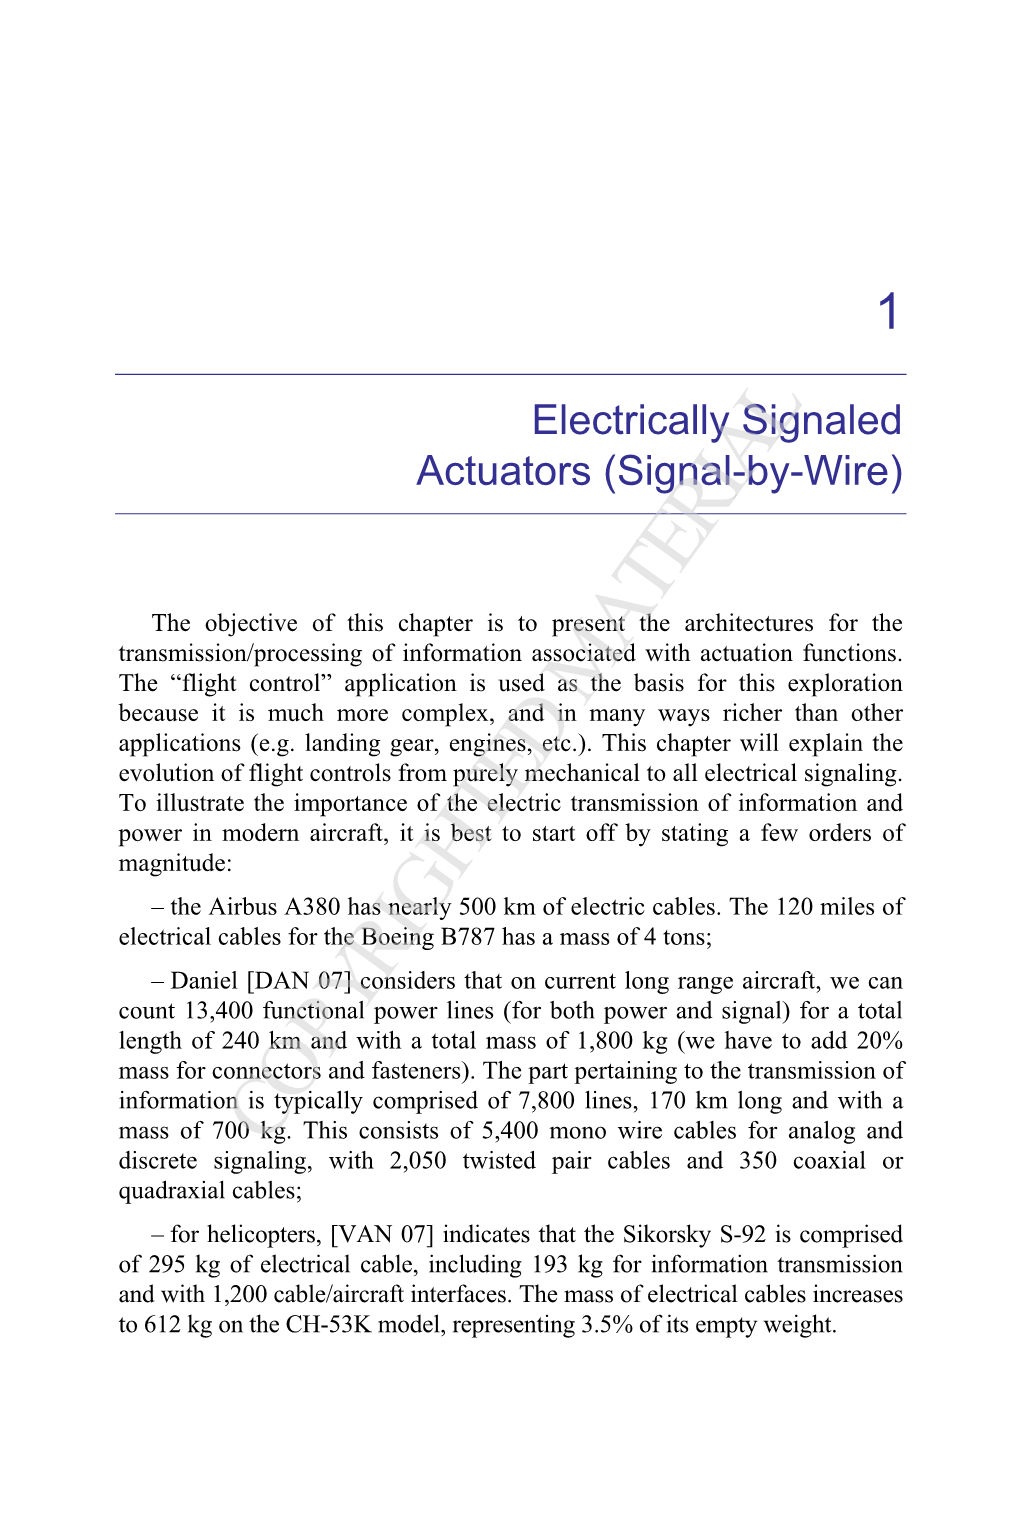 Electrically Signaled Actuators (Signal-By-Wire)